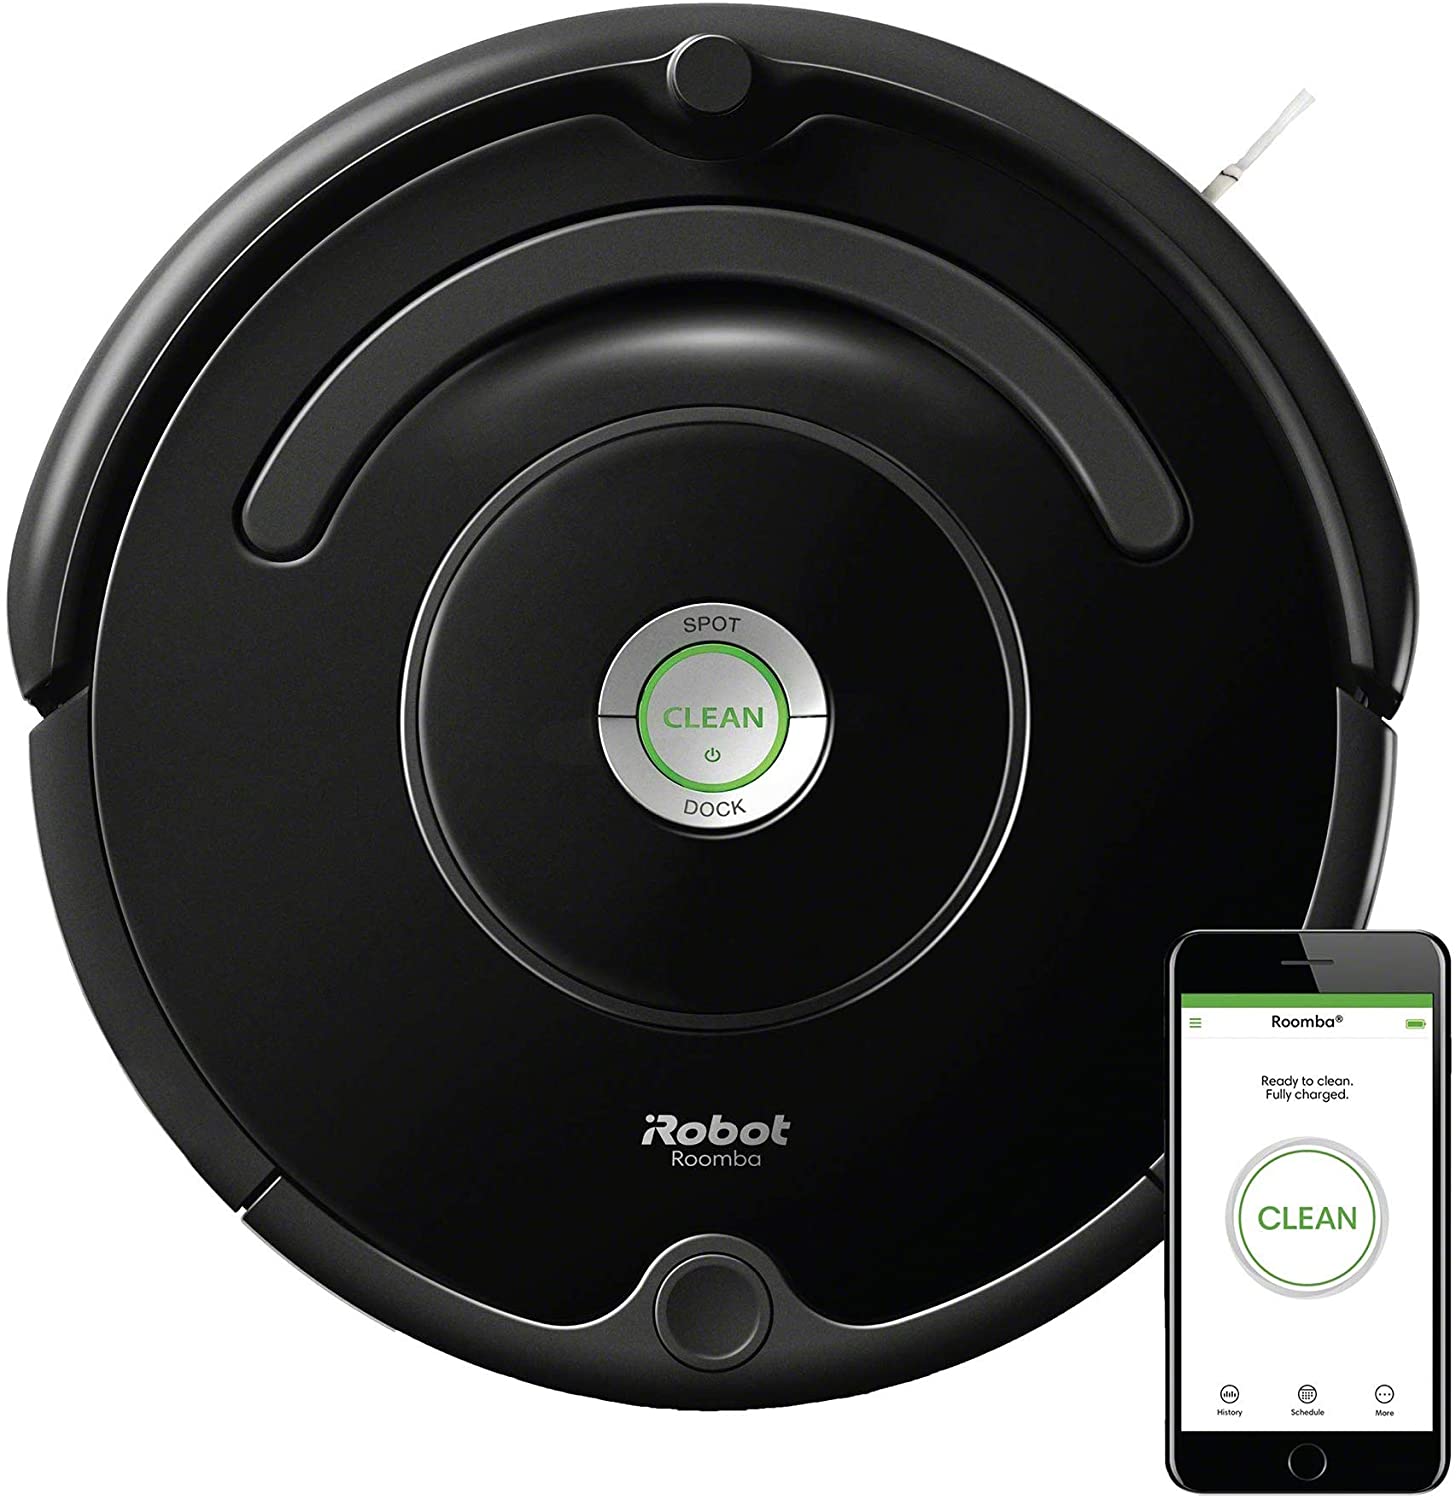 iRobot Roomba 675 Robot Vacuum-Wi-Fi Connectivity, Works with Alexa, Good for Pet Hair, Carpets, Hard Floors, Self-Charging - image 1 of 9